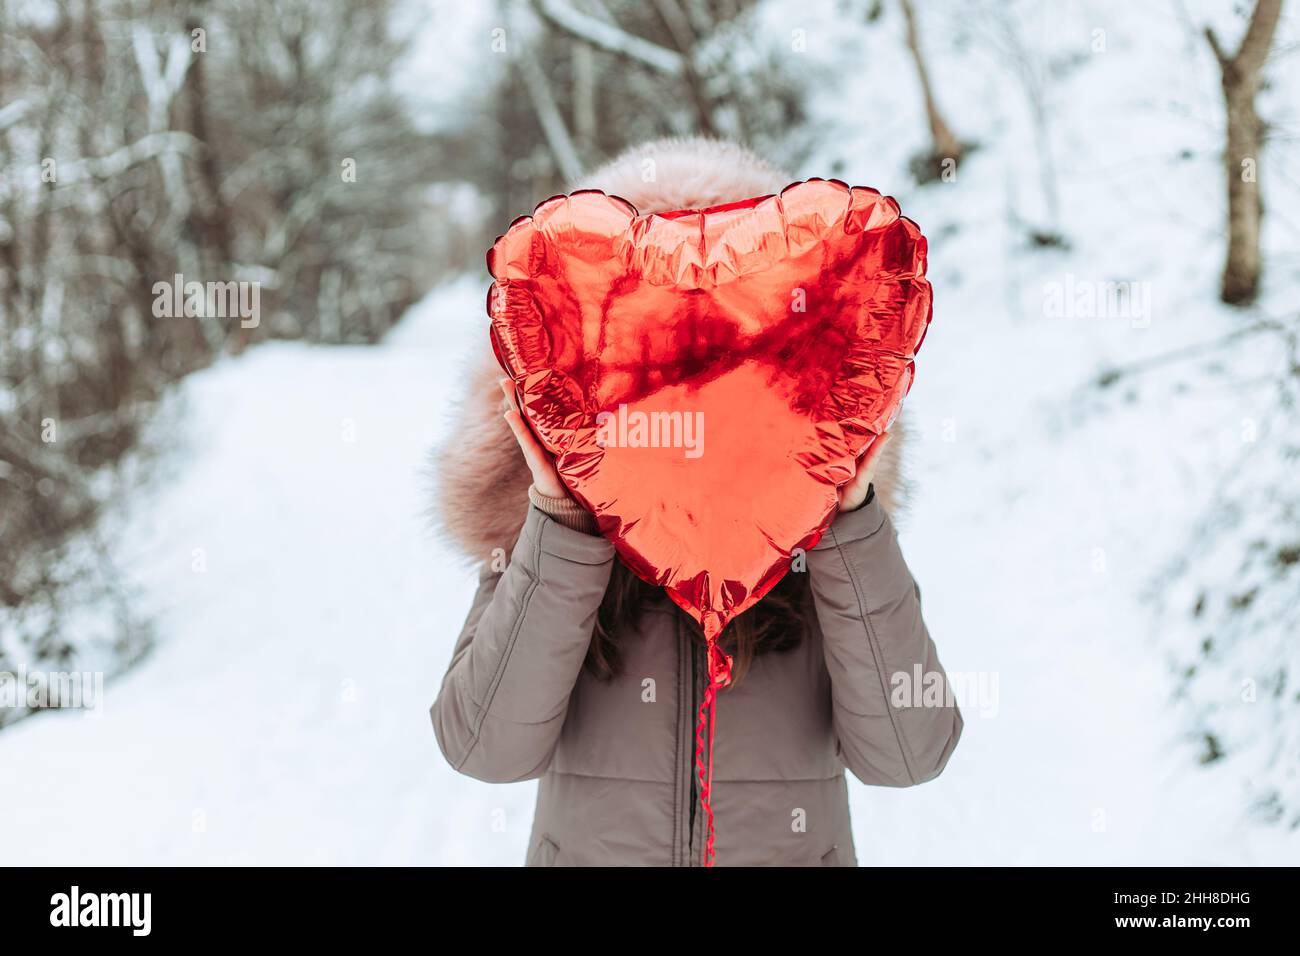 Girl in fur jacket holding red helium heart shaped balloon in front of her face Stock Photo